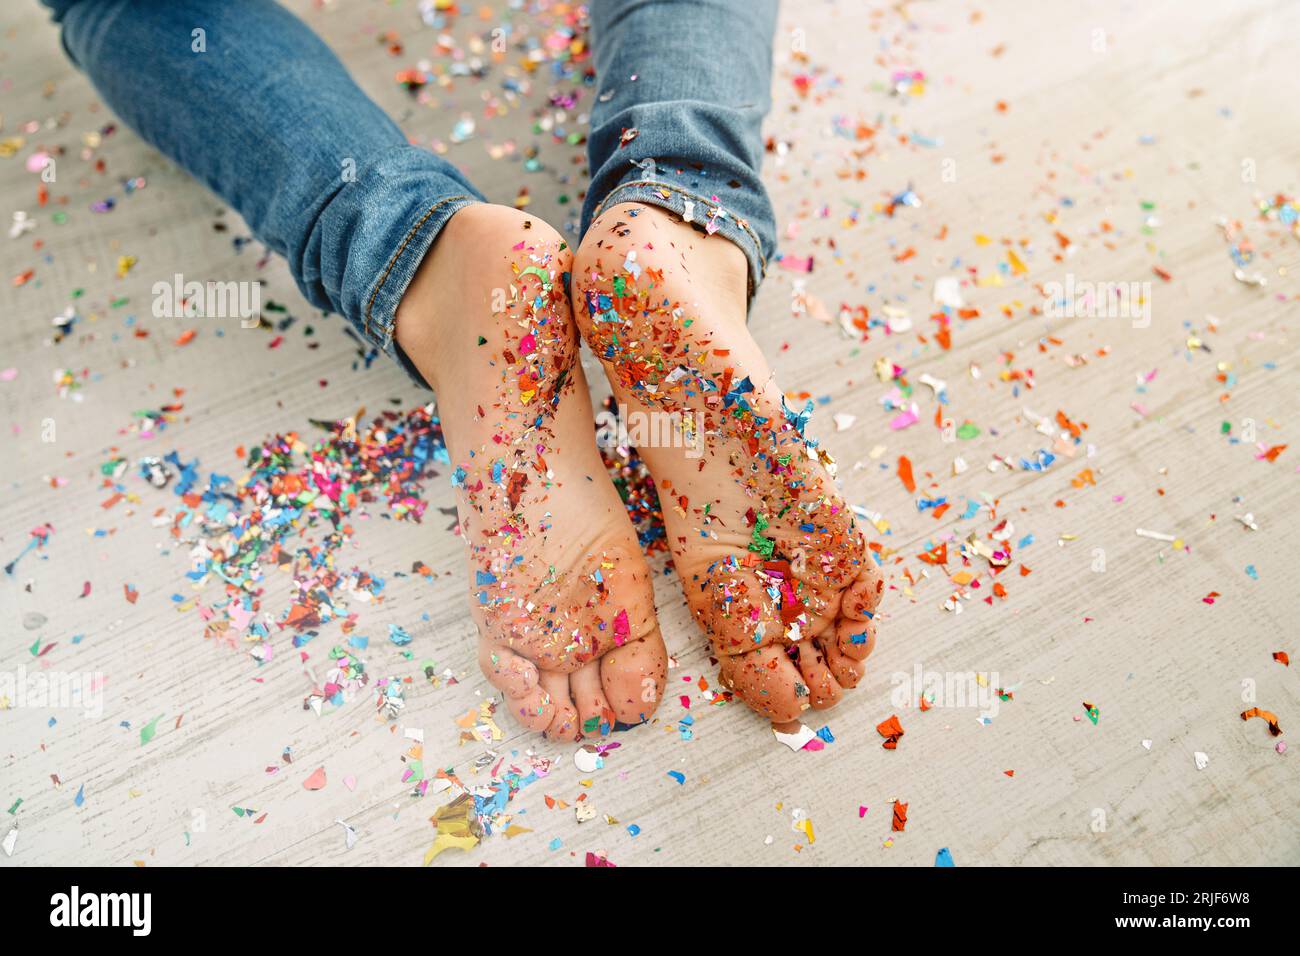 Top view of crop unrecognizable barefoot child in jeans lying on wooden light floor covered with colorful confetti Stock Photo